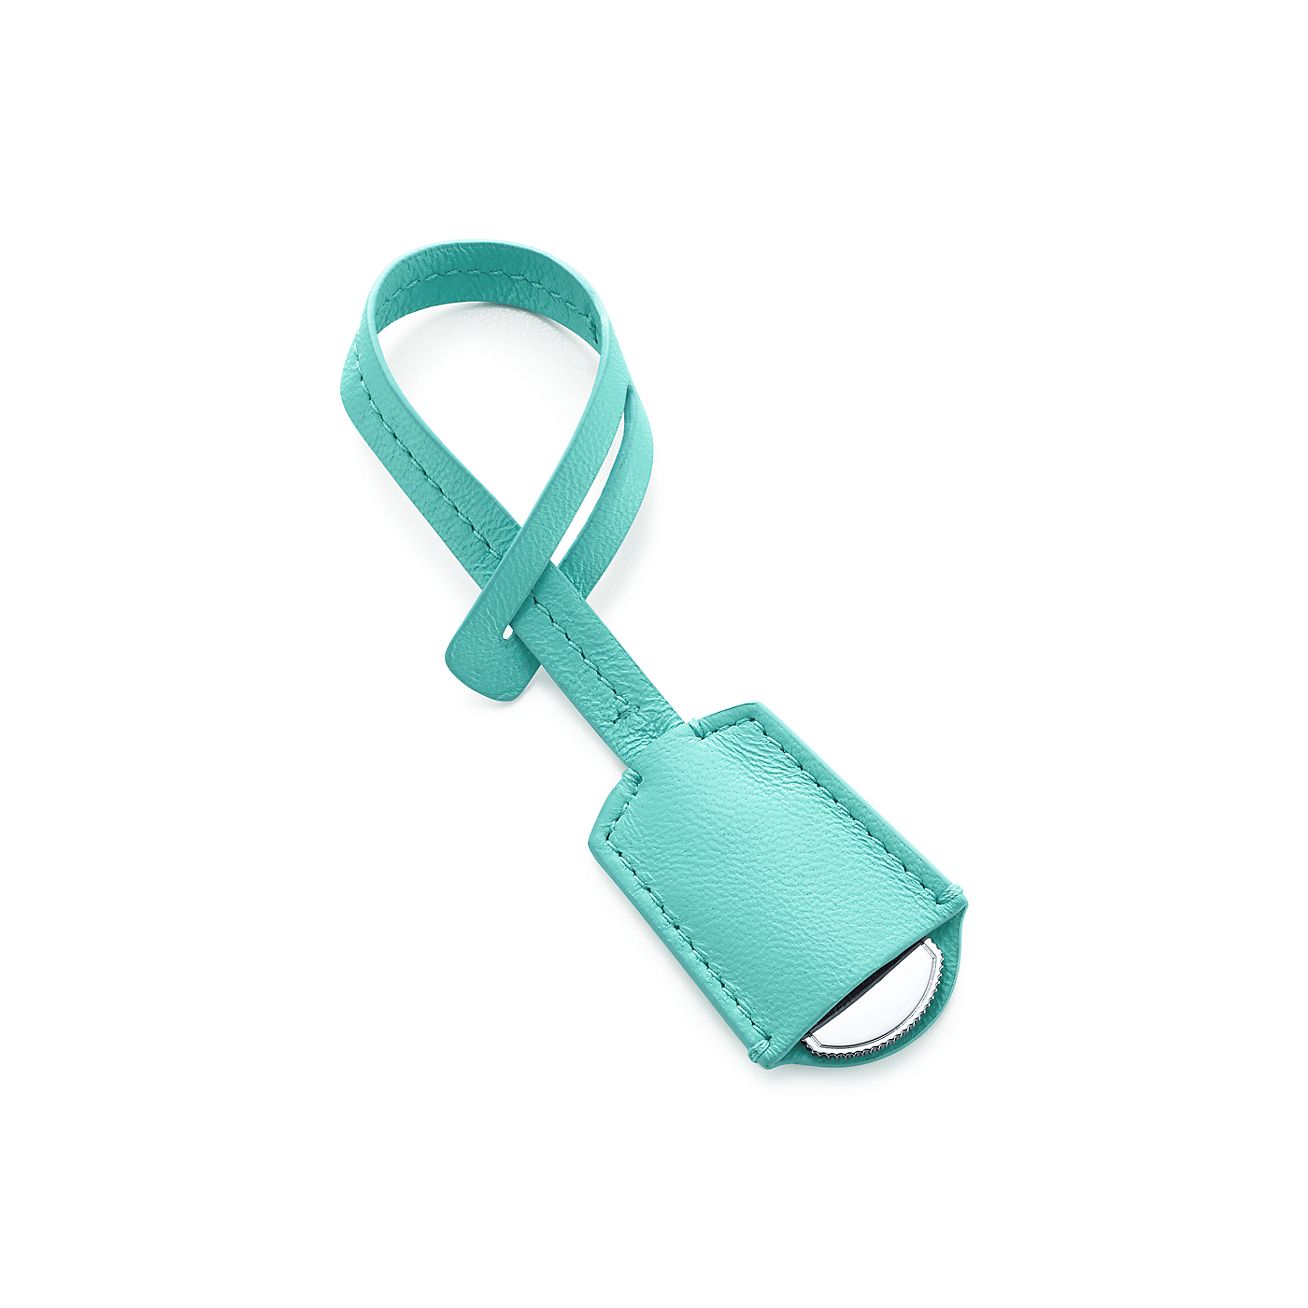 Covered bag charm in Tiffany Blue 